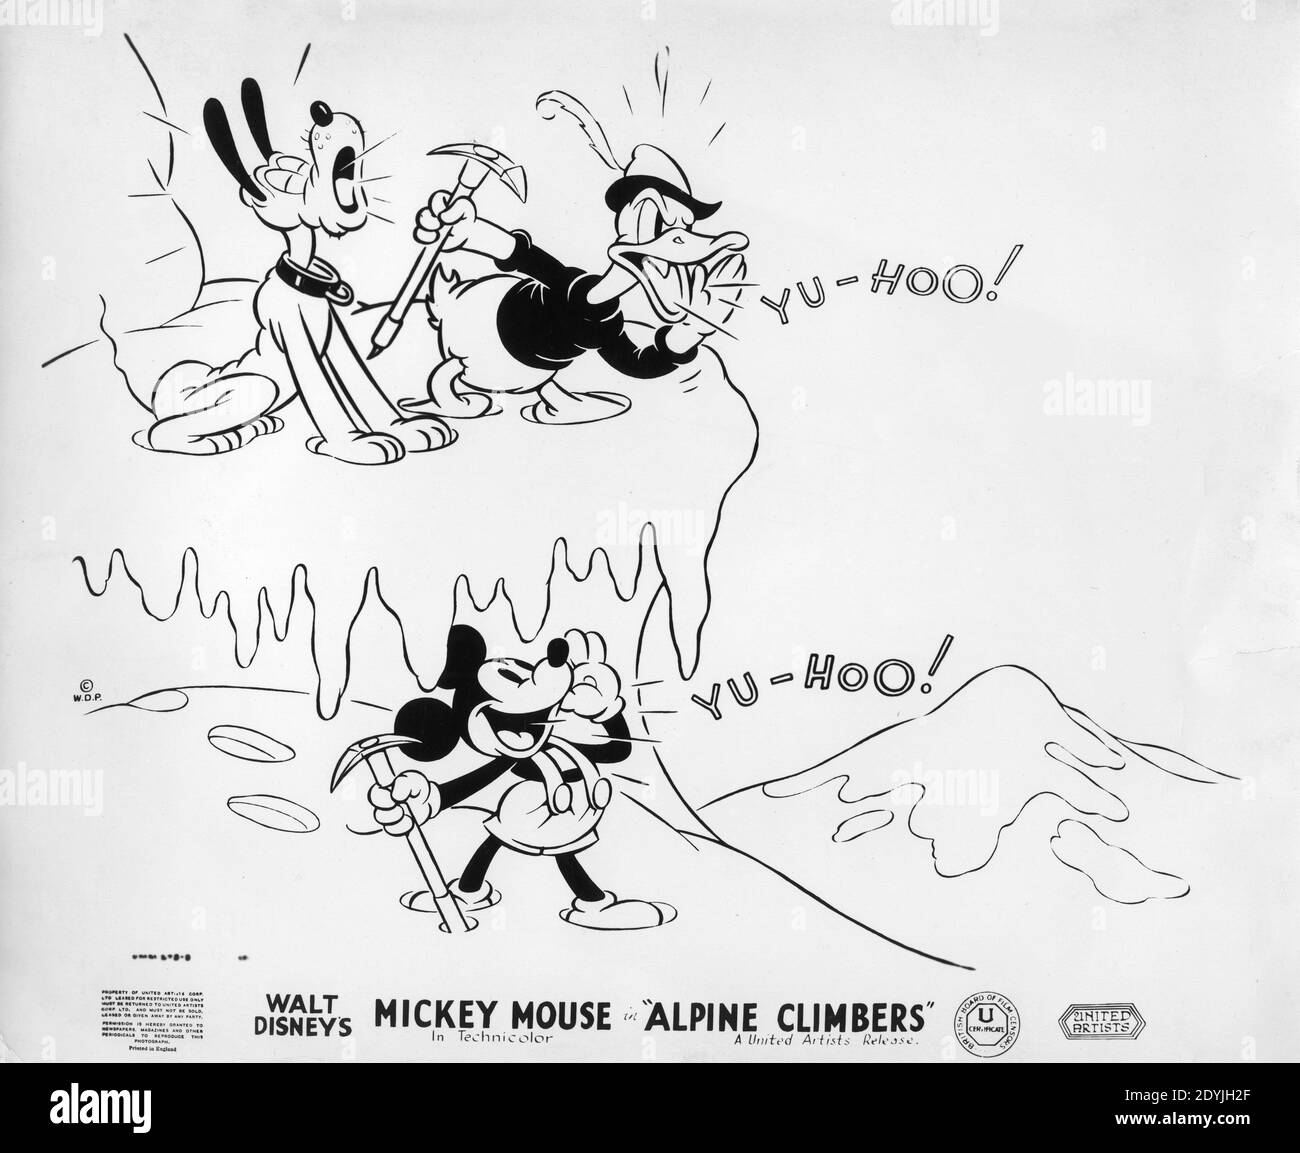 WALT DISNEY's PLUTO DONALD DUCK and MICKEY MOUSE in ALPINE CLIMBERS 1936 director DAVID HAND Walt Disney Productions / United Artists Stock Photo